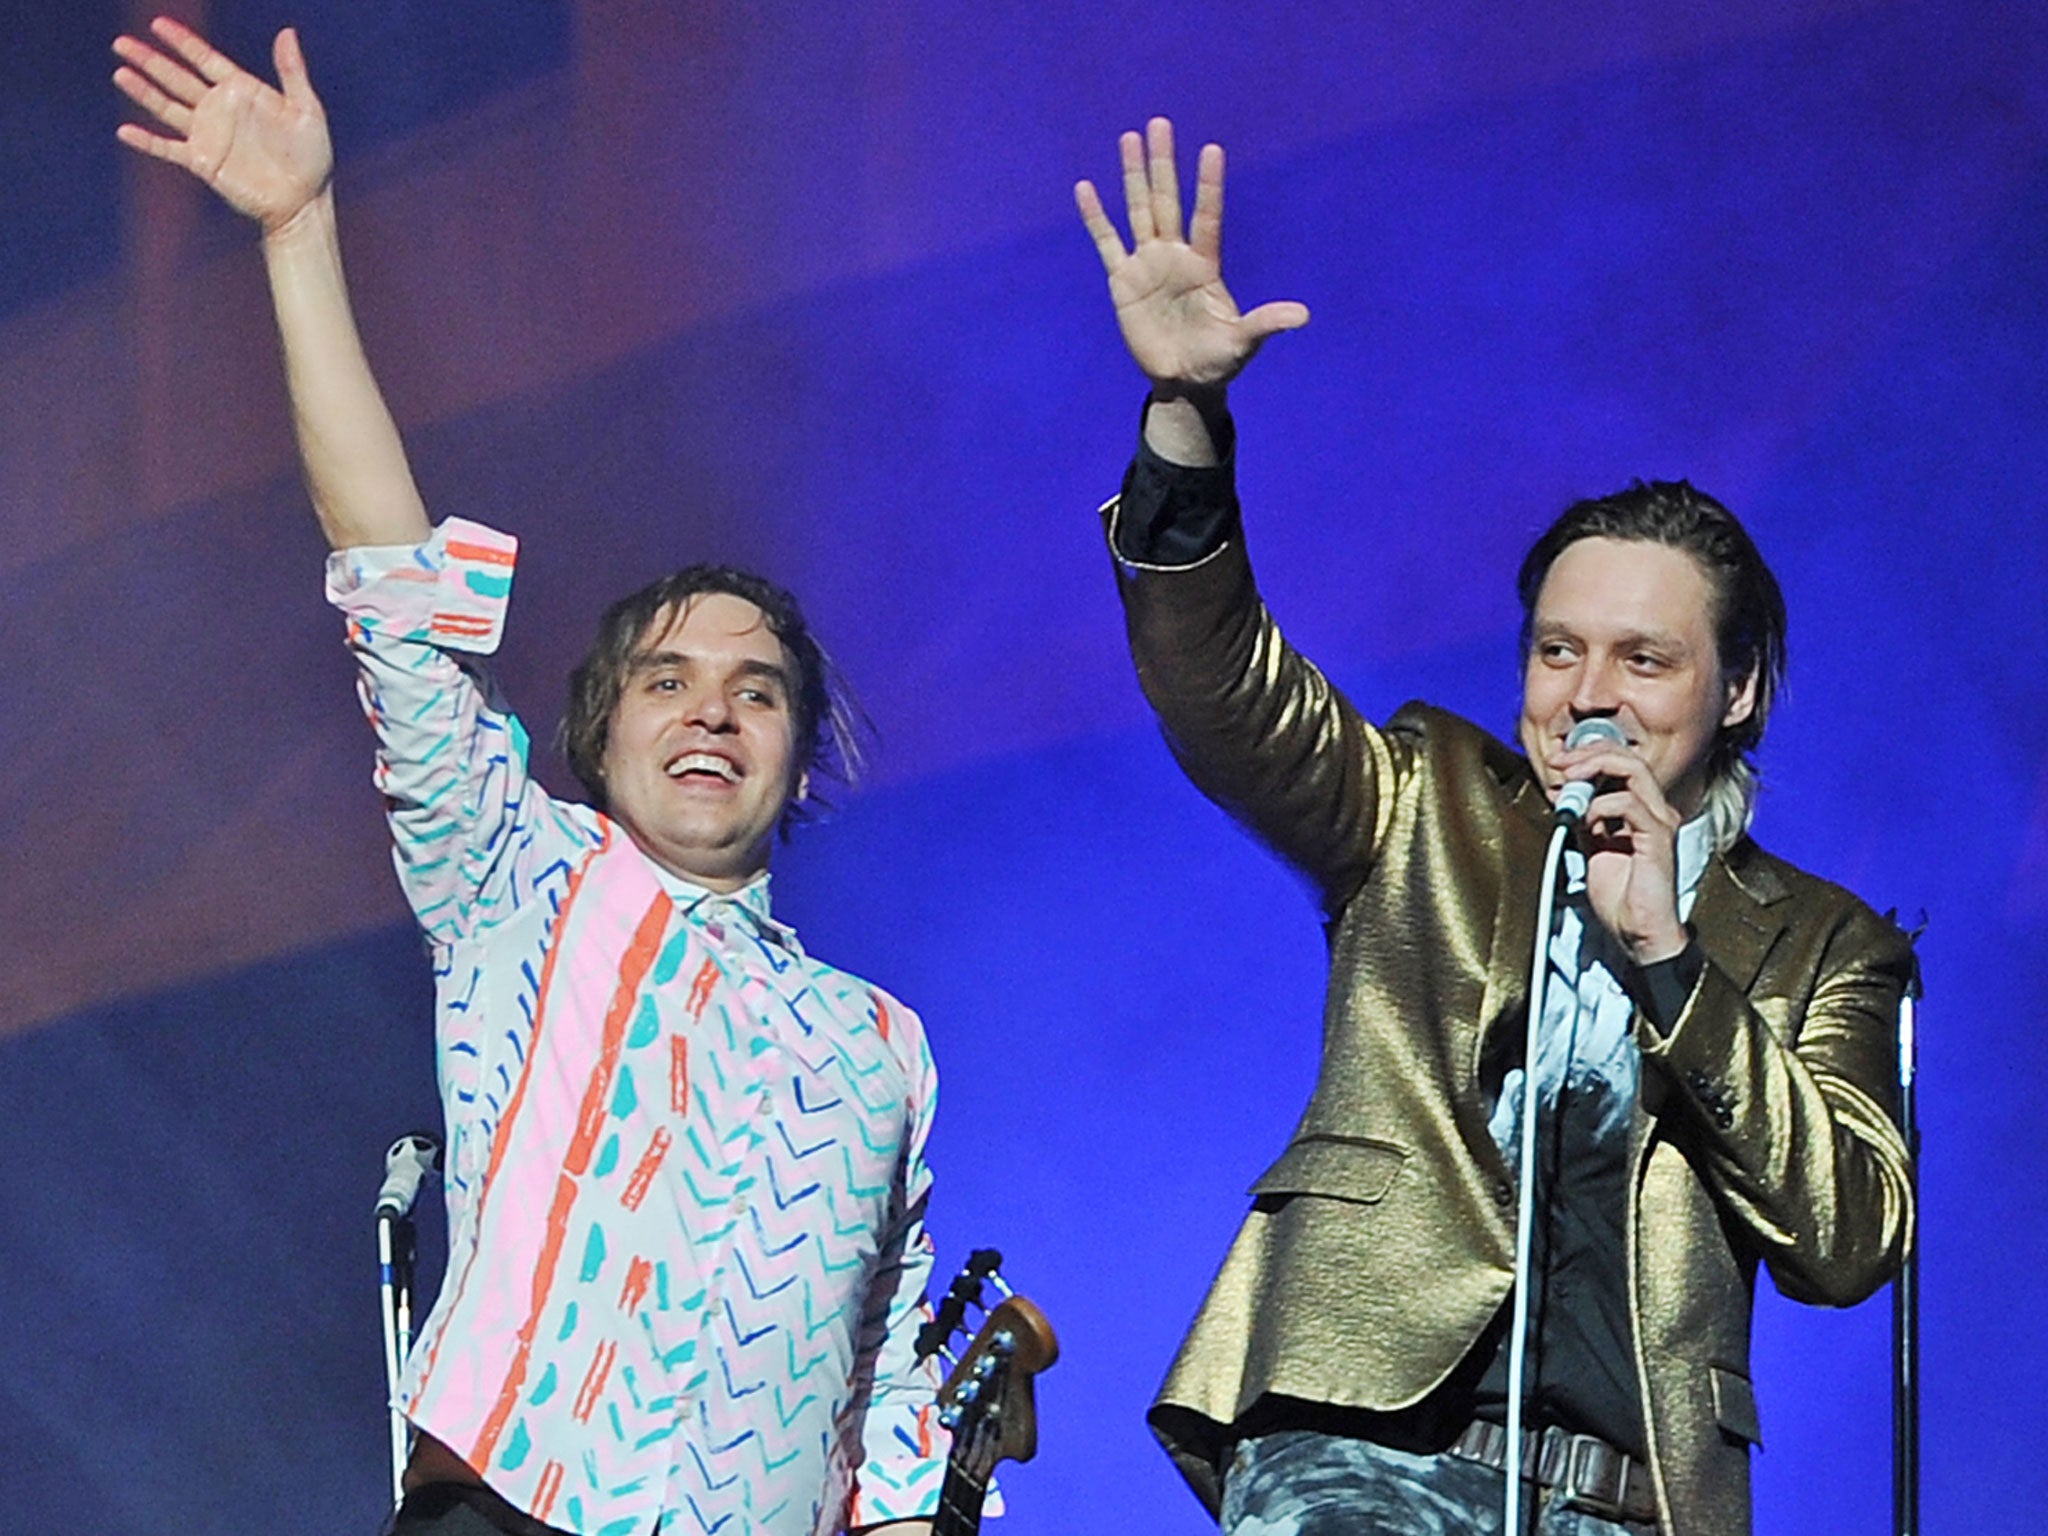 Win Butler and his Canadian band Arcade Fire will play Glastonbury next June